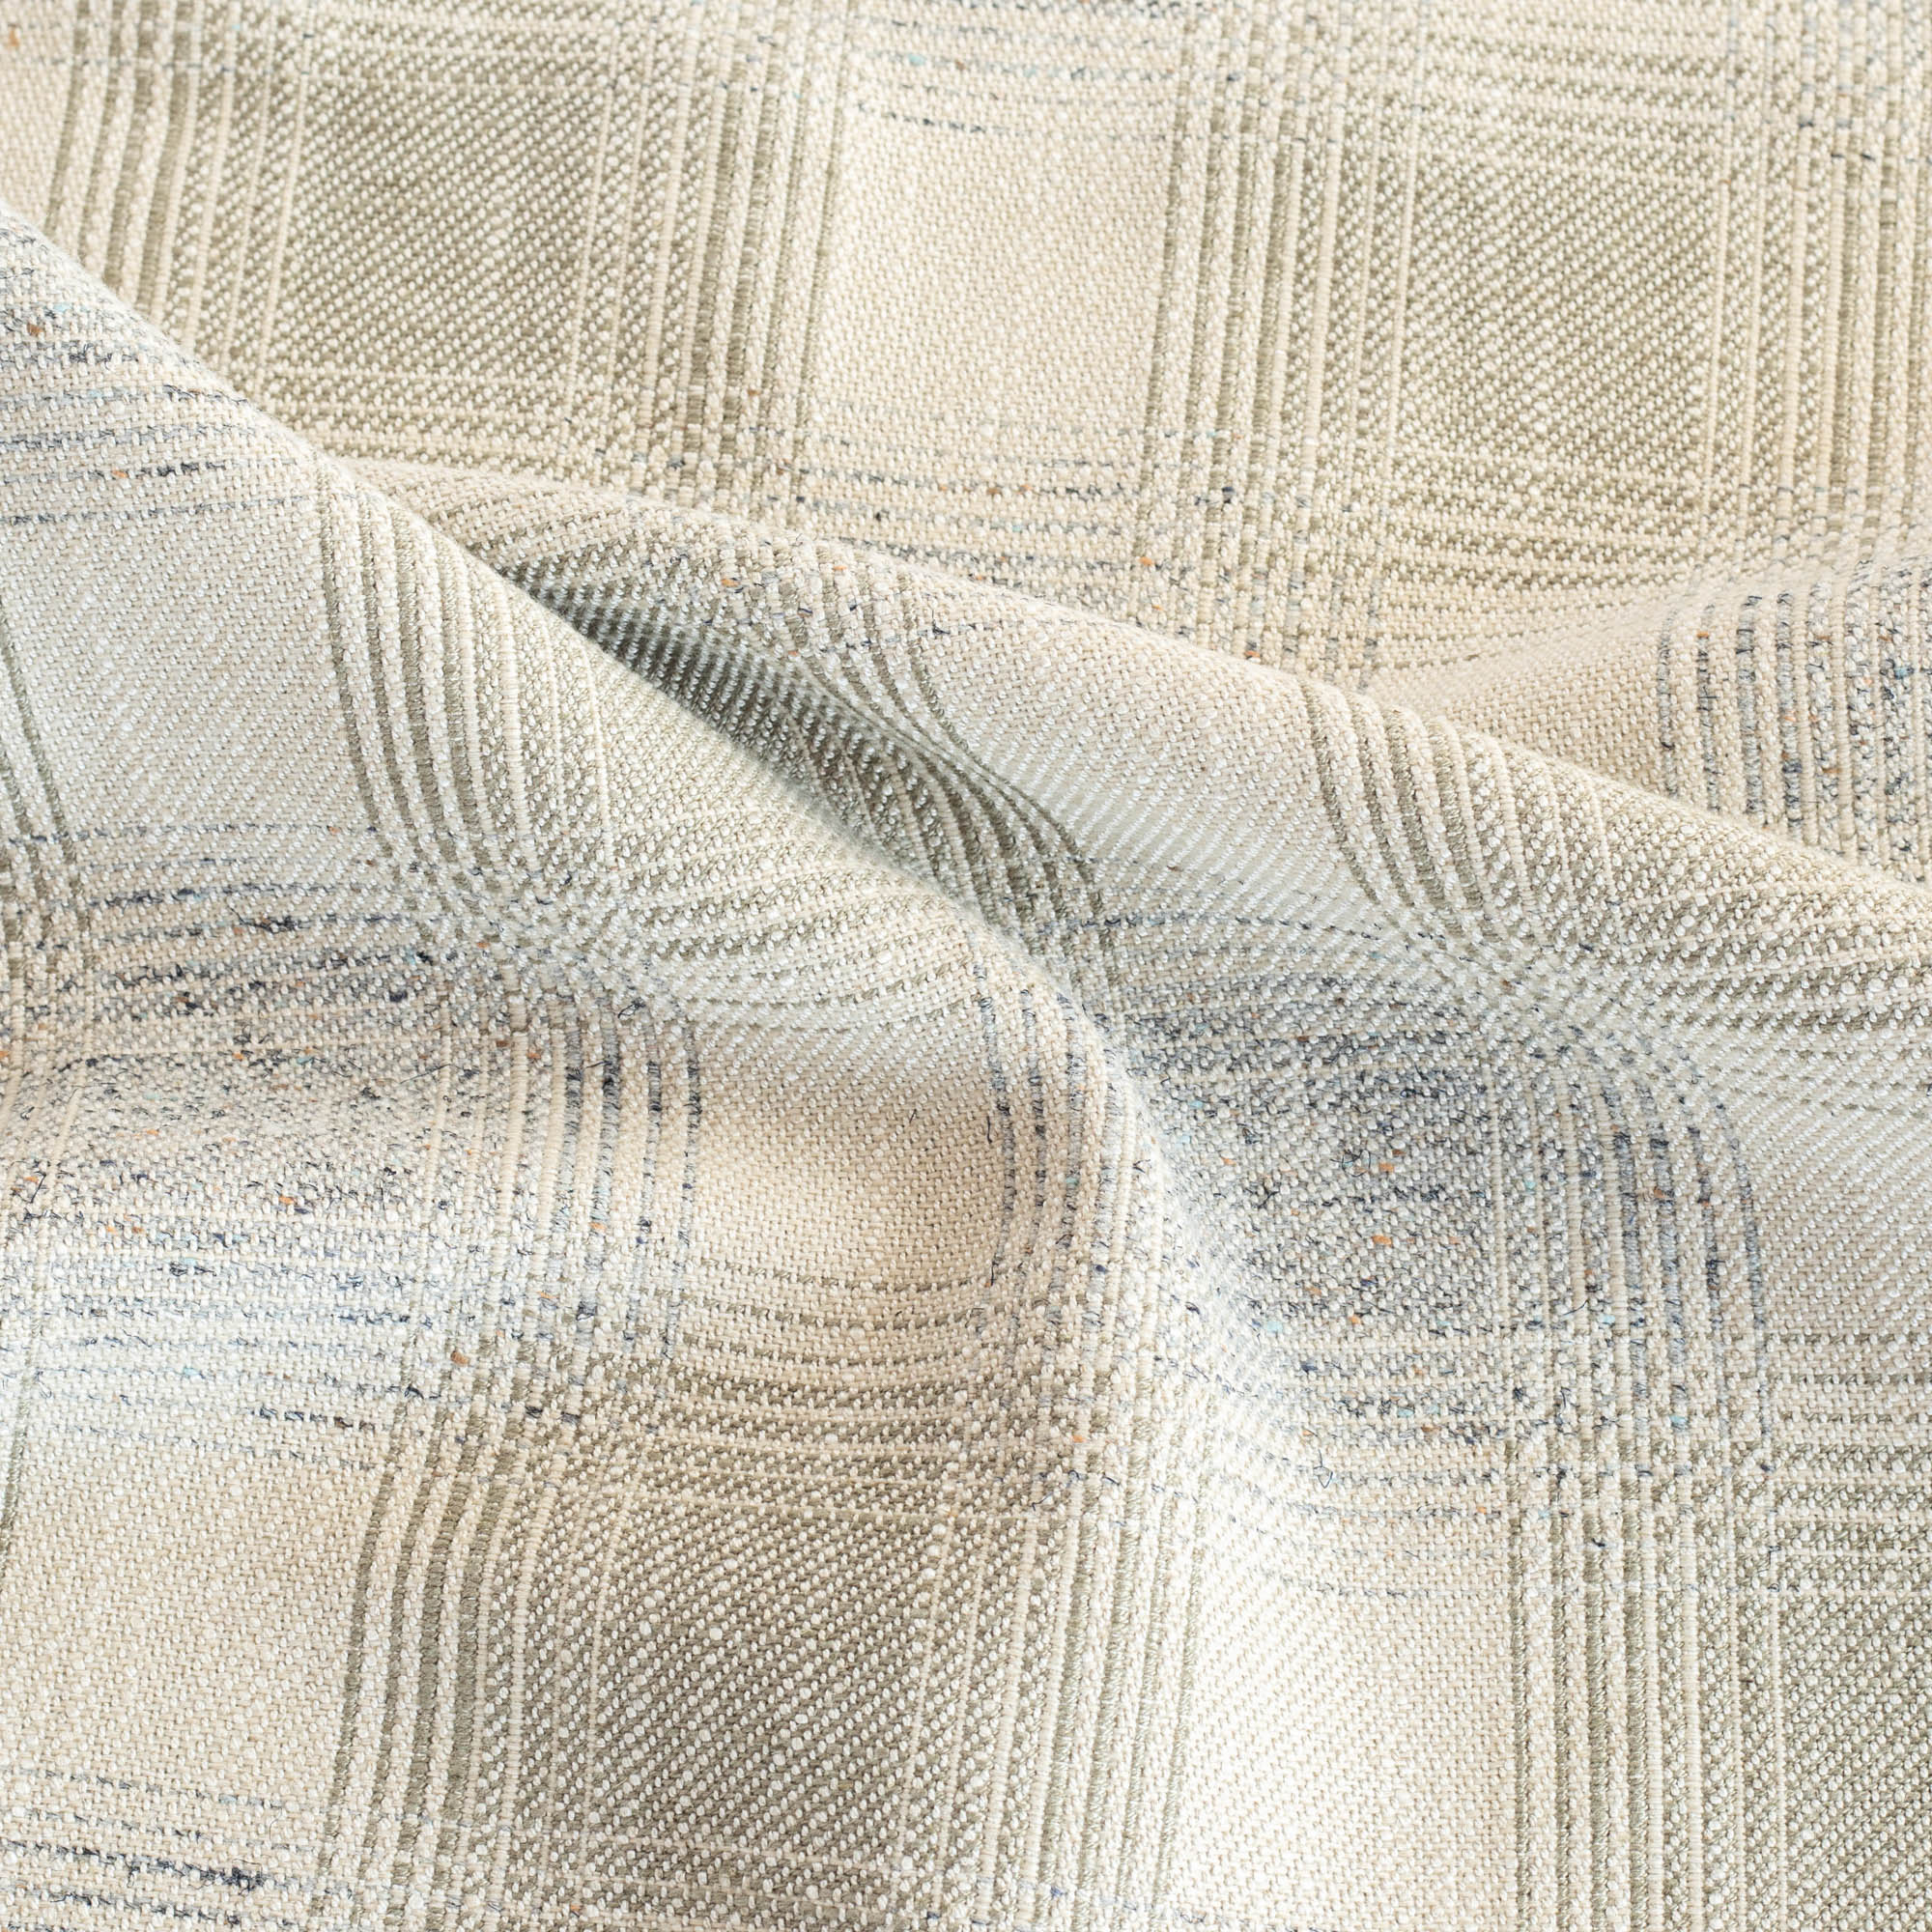 Cove Seaside Fabric, a light gray and denim blue plaid upholstery fabric from Tonic Living